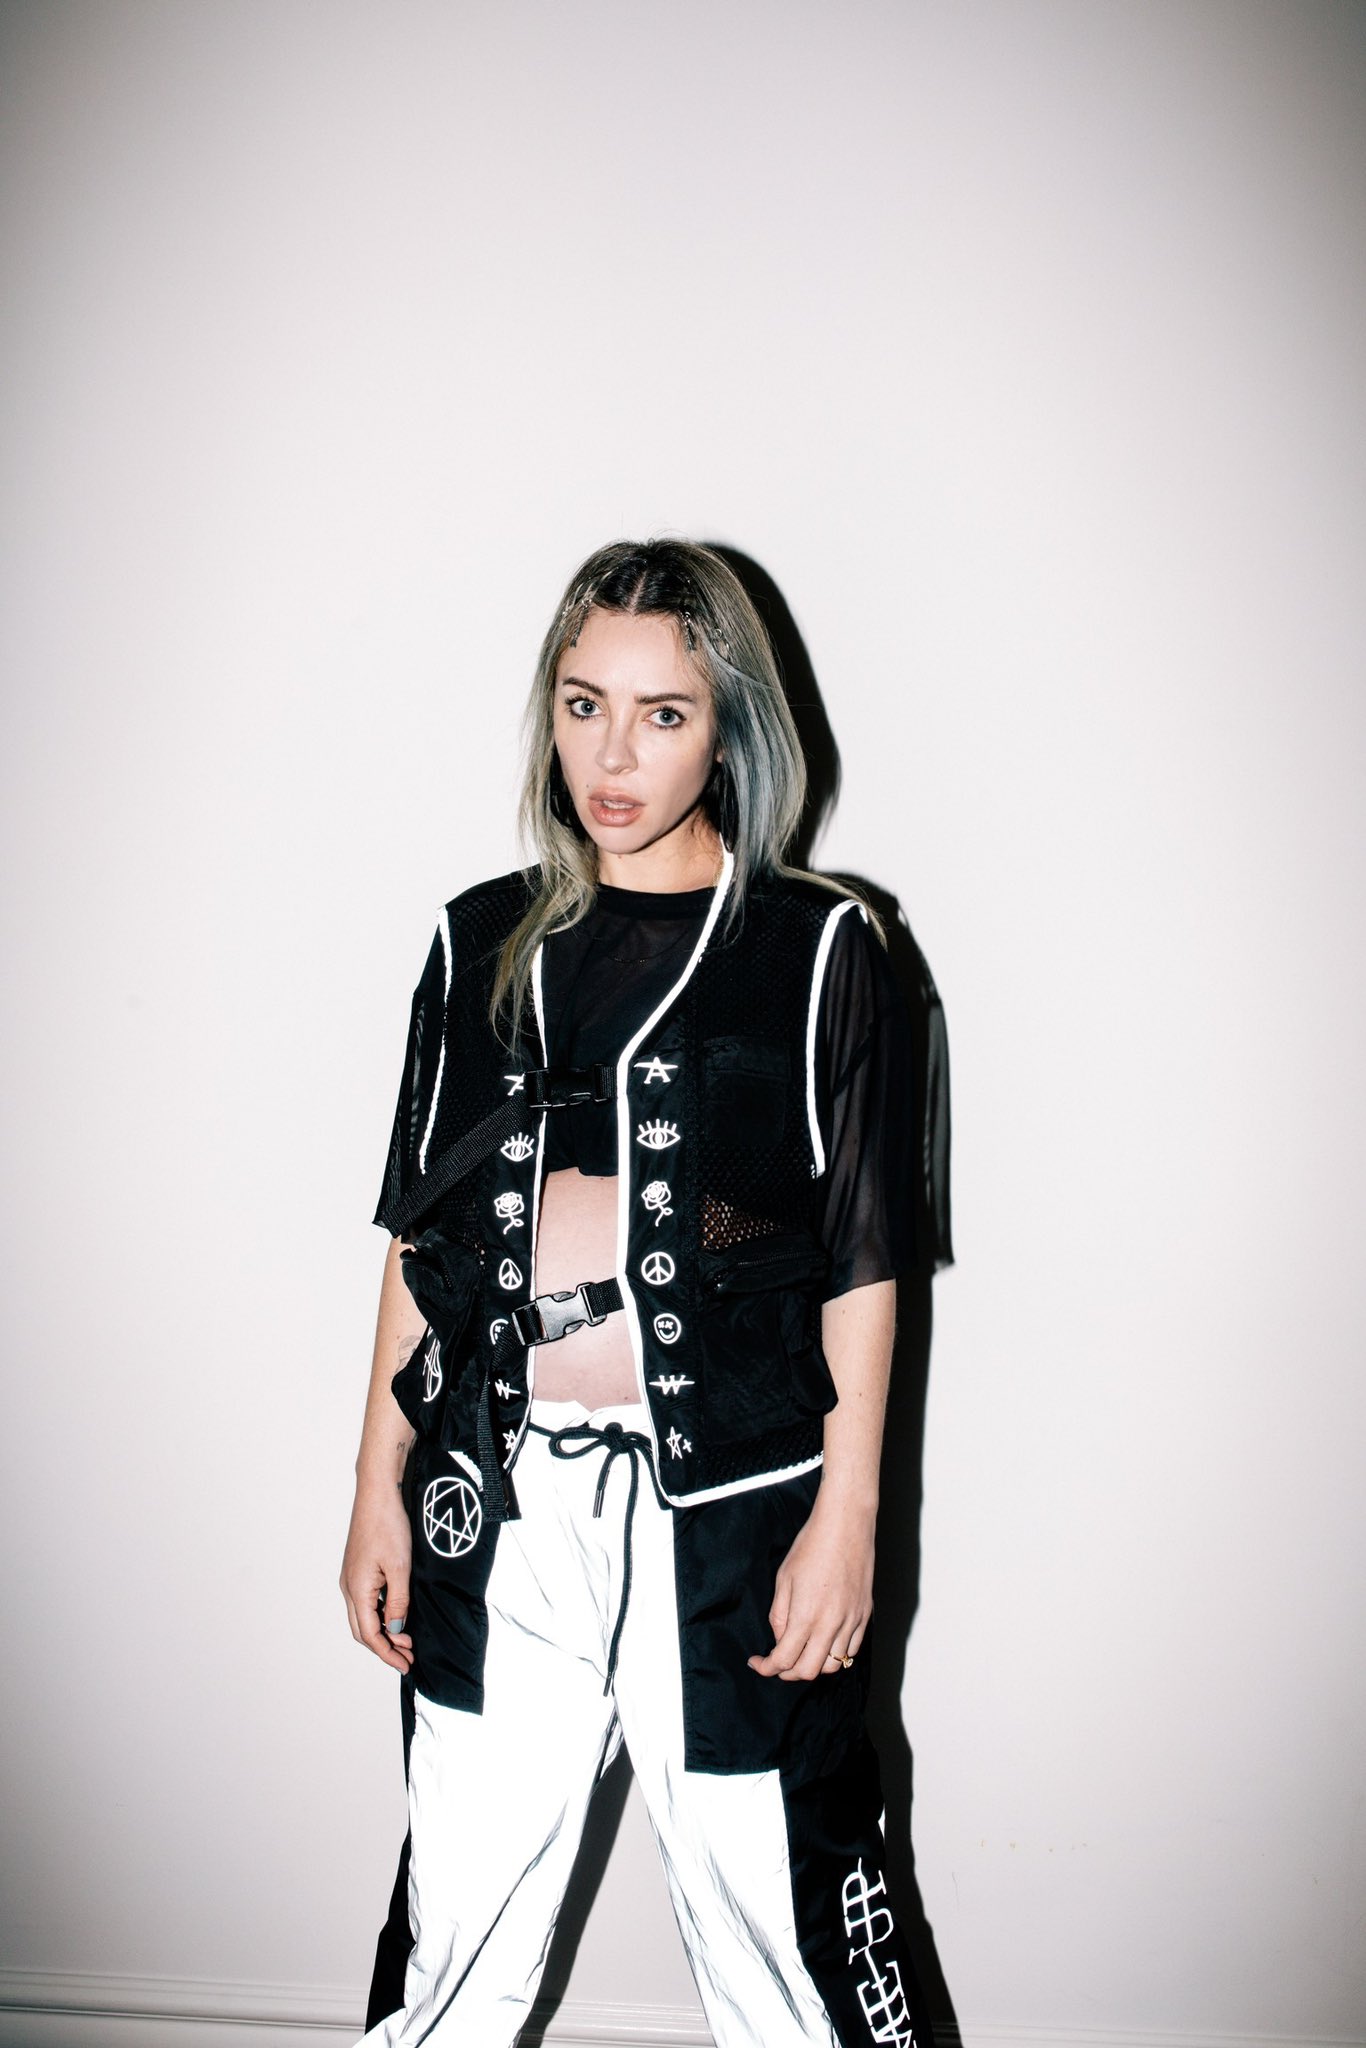 ALISON WONDERLAND on X: So excited to present the Alison Wonderland x iHr  limited edition capsule collection. On sale tomorrow 11am PST. It includes  FMU Reflective vest, reflective joggers, black light leg